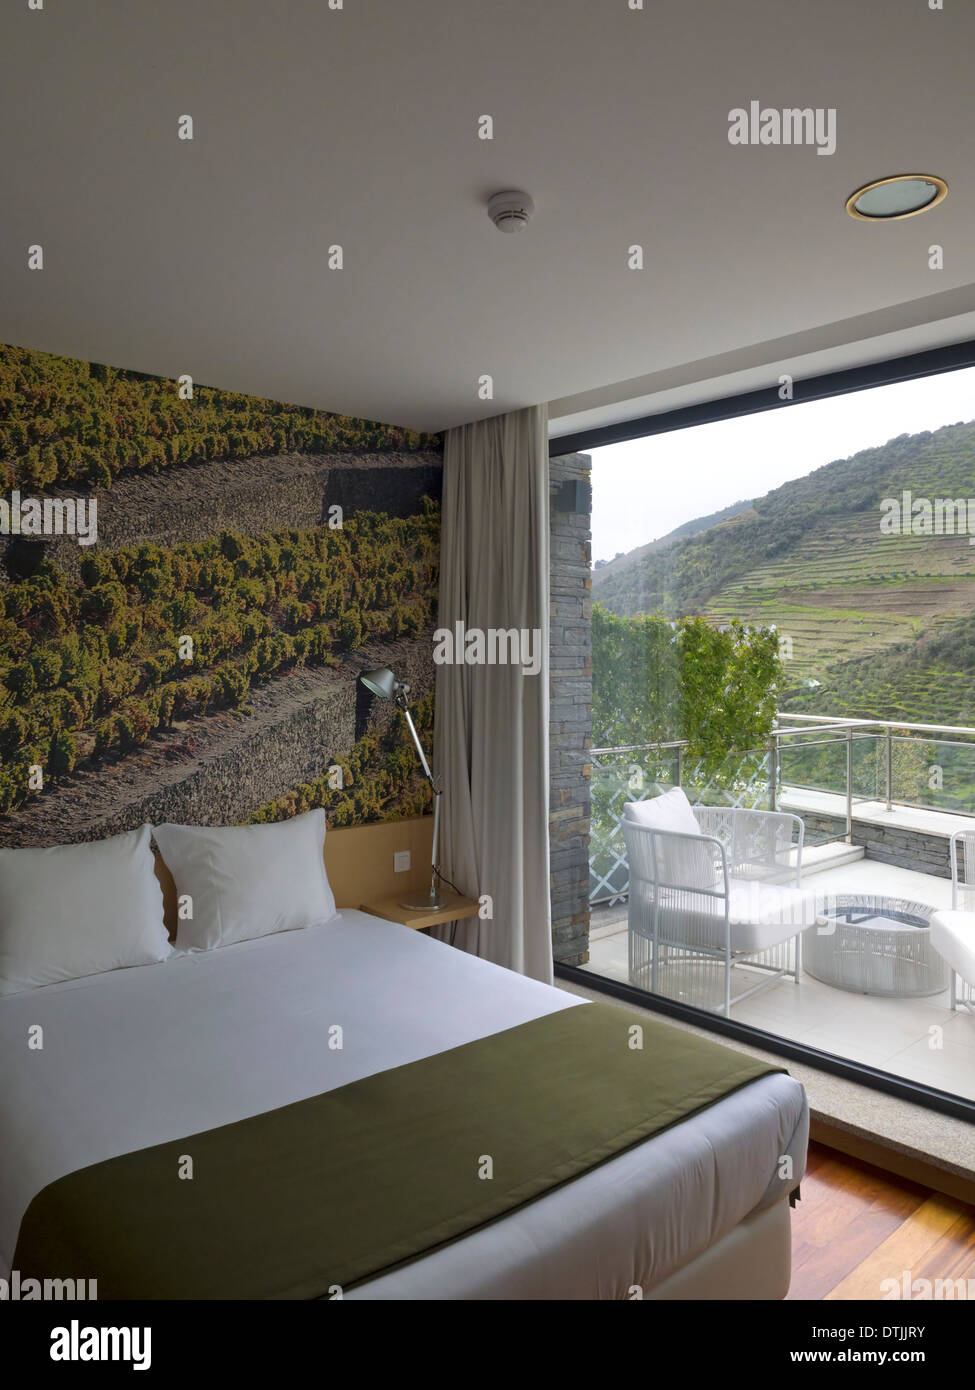 Hotel room with modern design overlooking a hill in the Douro region of Portugal Stock Photo